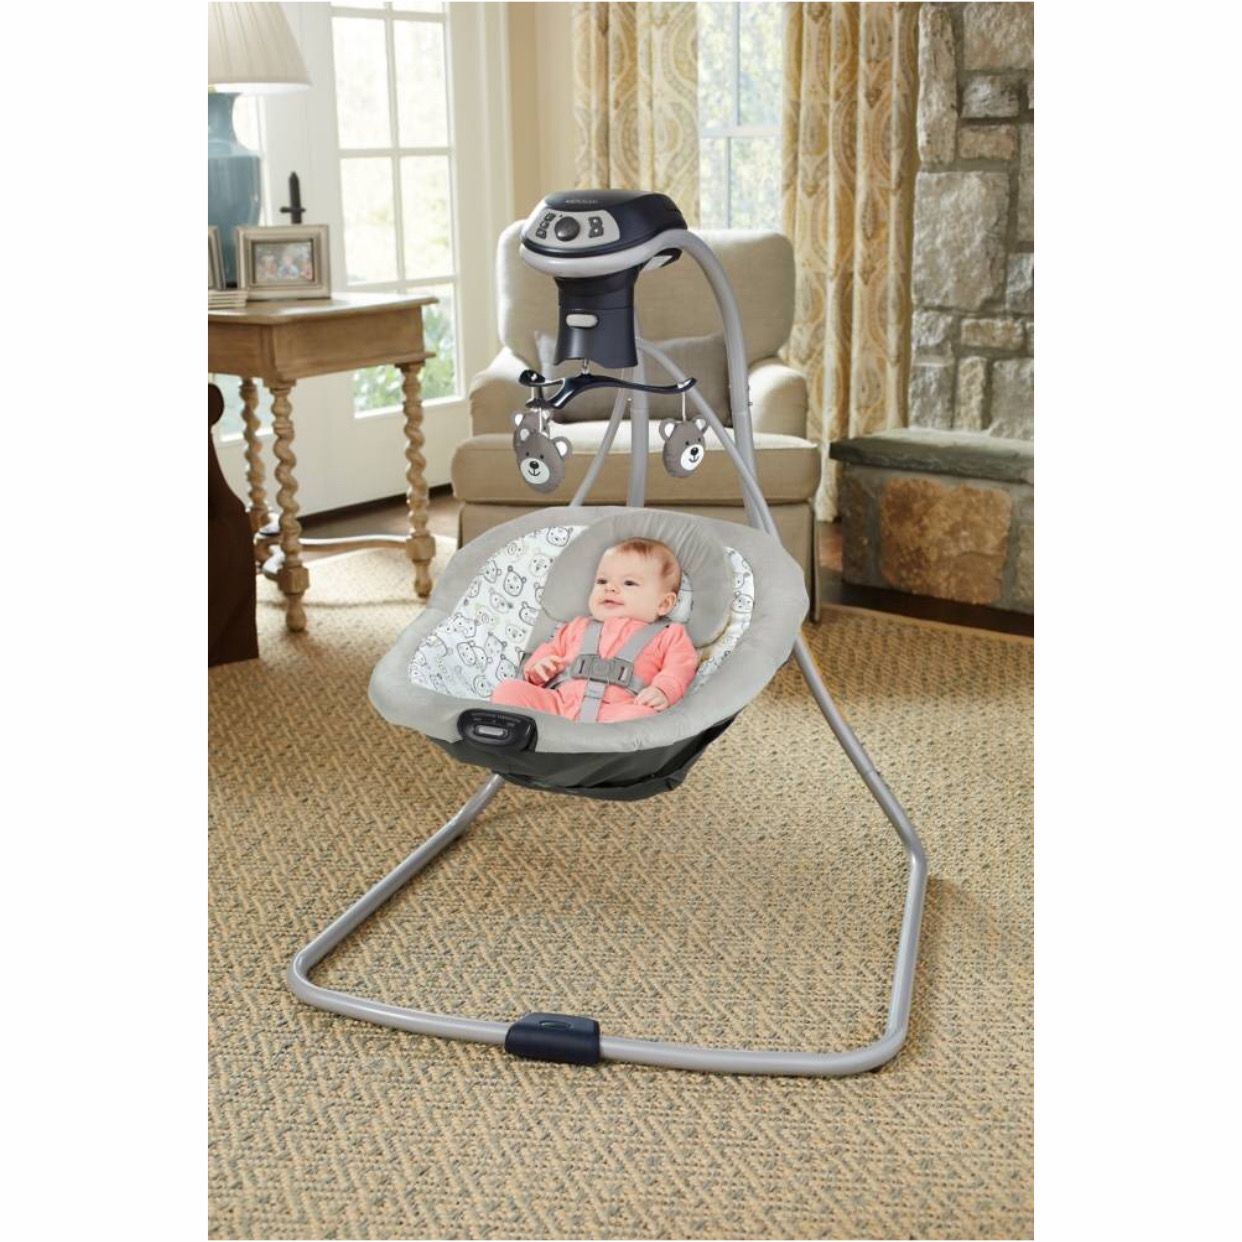 graco baby swing with teddy bear mobile